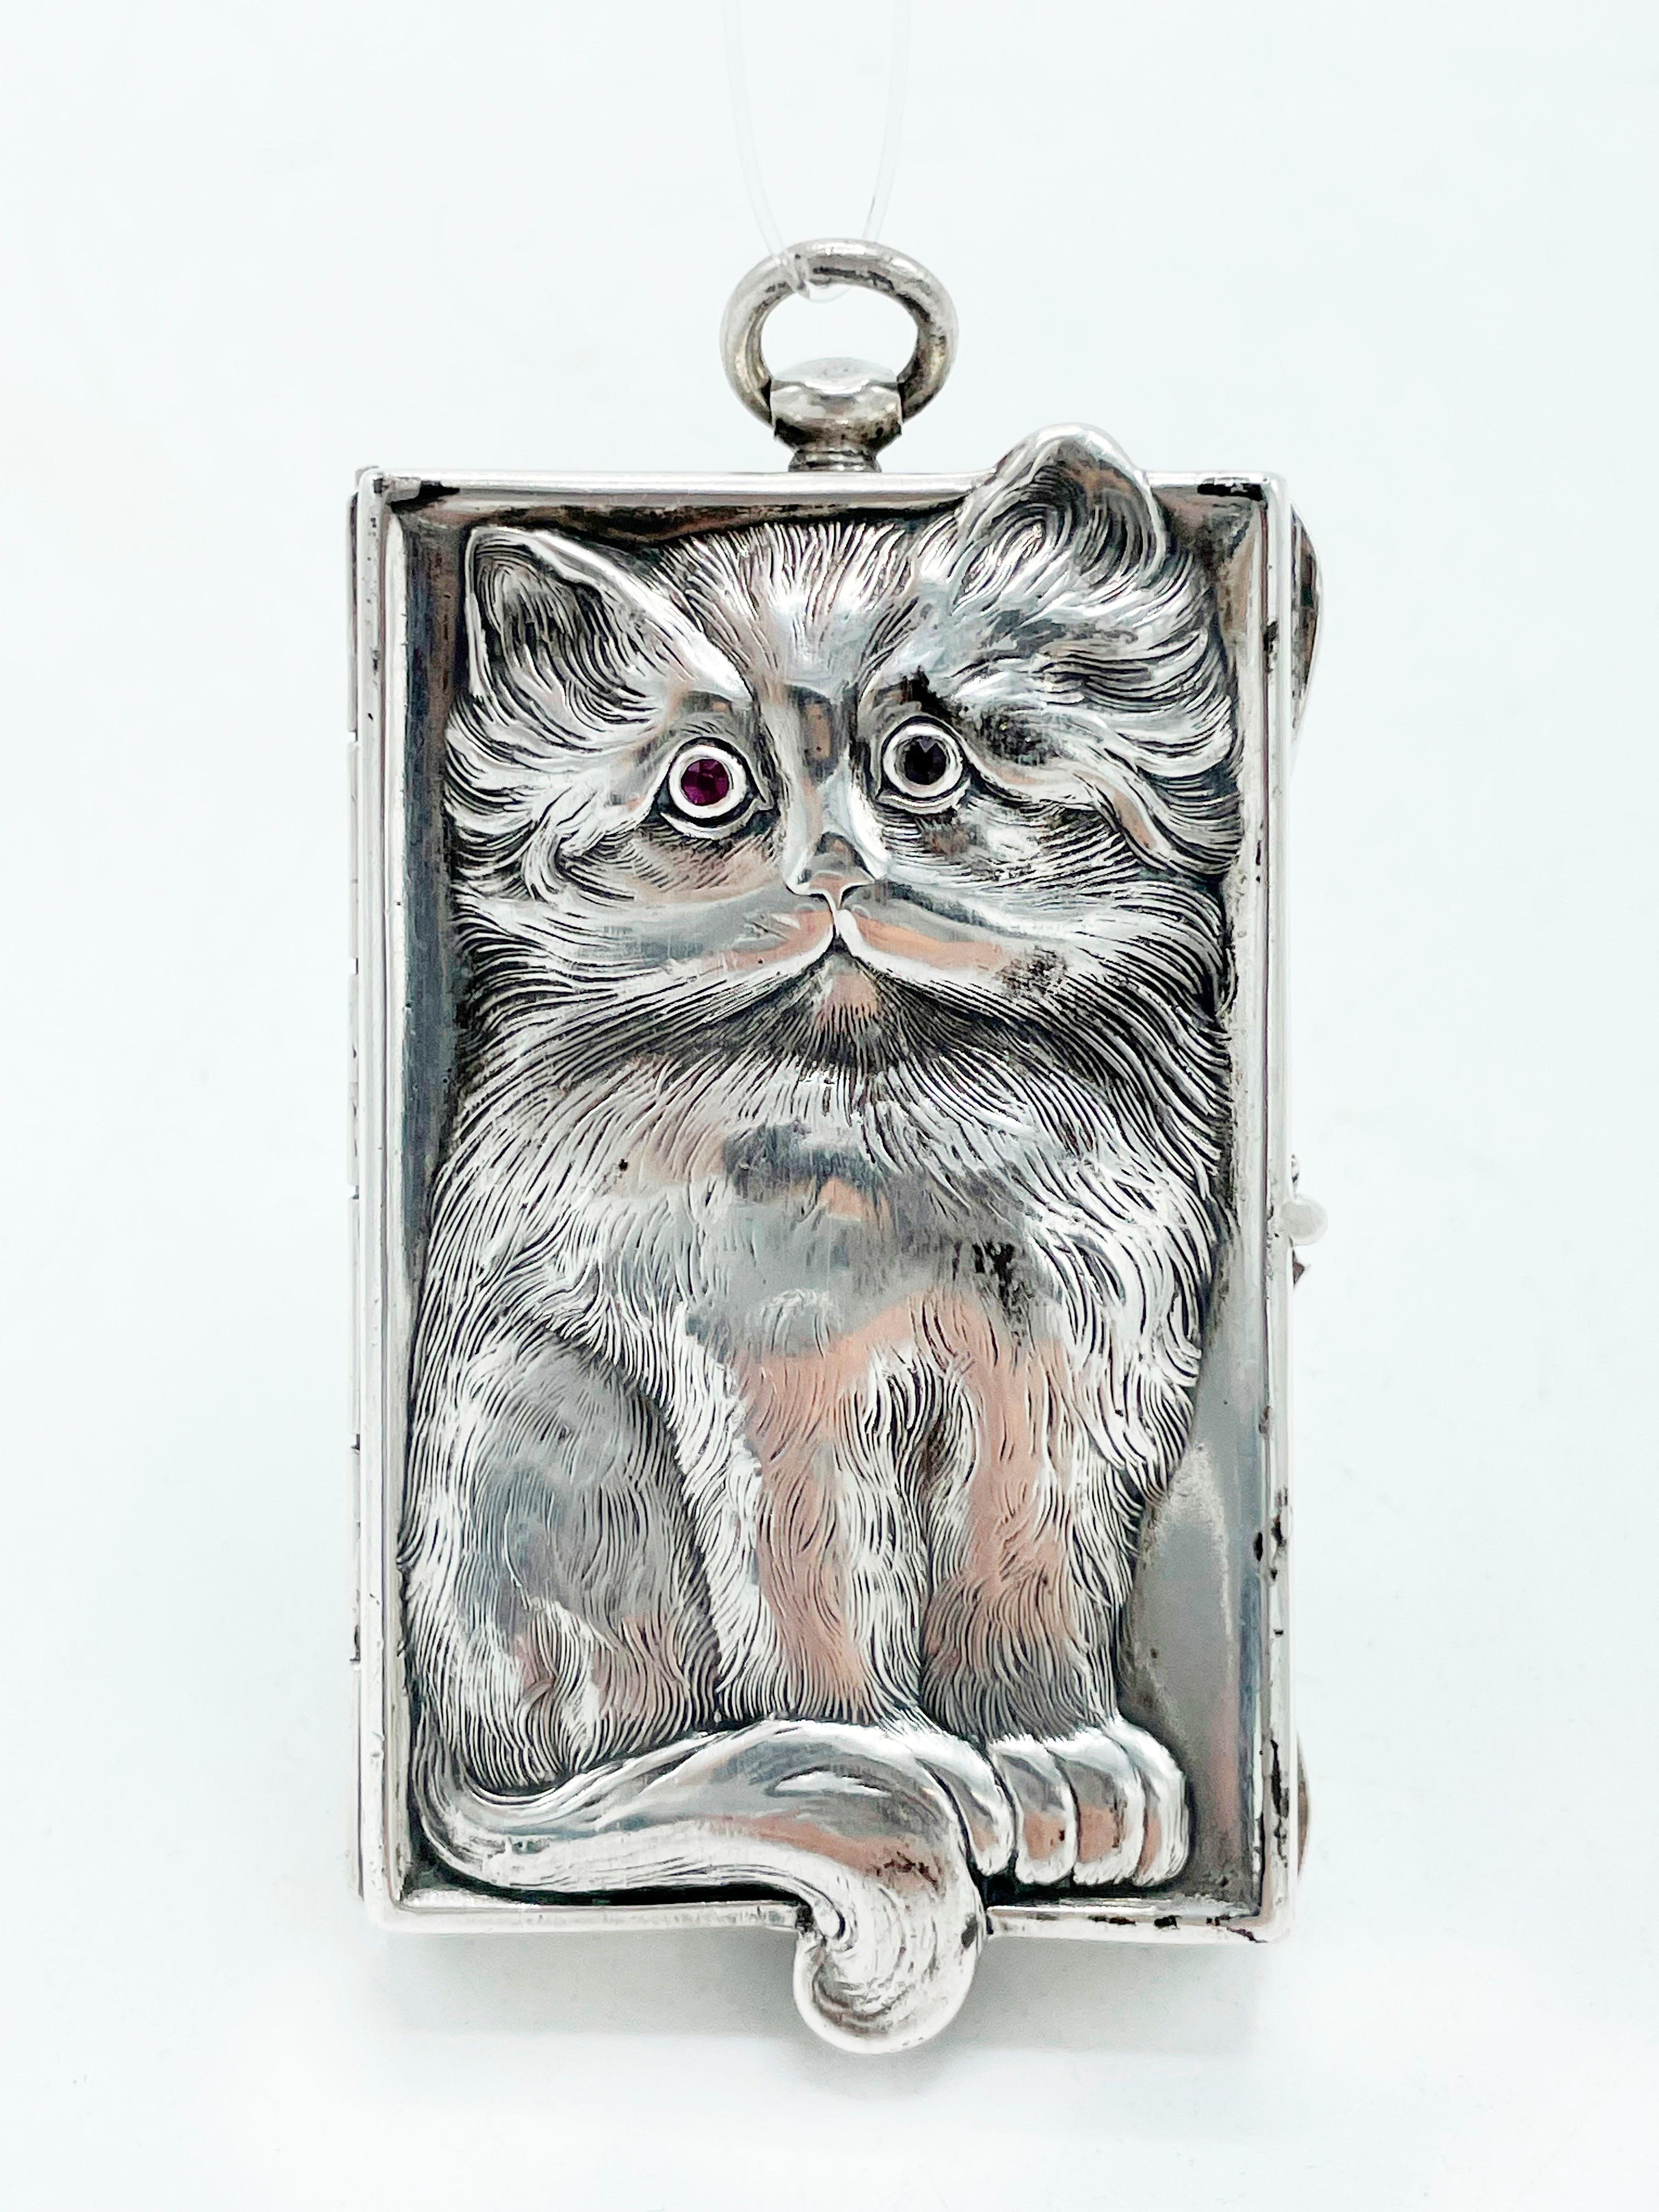 A magnificent antique German solid silver Minaudière adorned with a silver cat engraved in deep relief on the front of the case, with the back of the cat on the back cover. The cat is encrusted with precious jewels with ruby ​​eyes.
The interior has